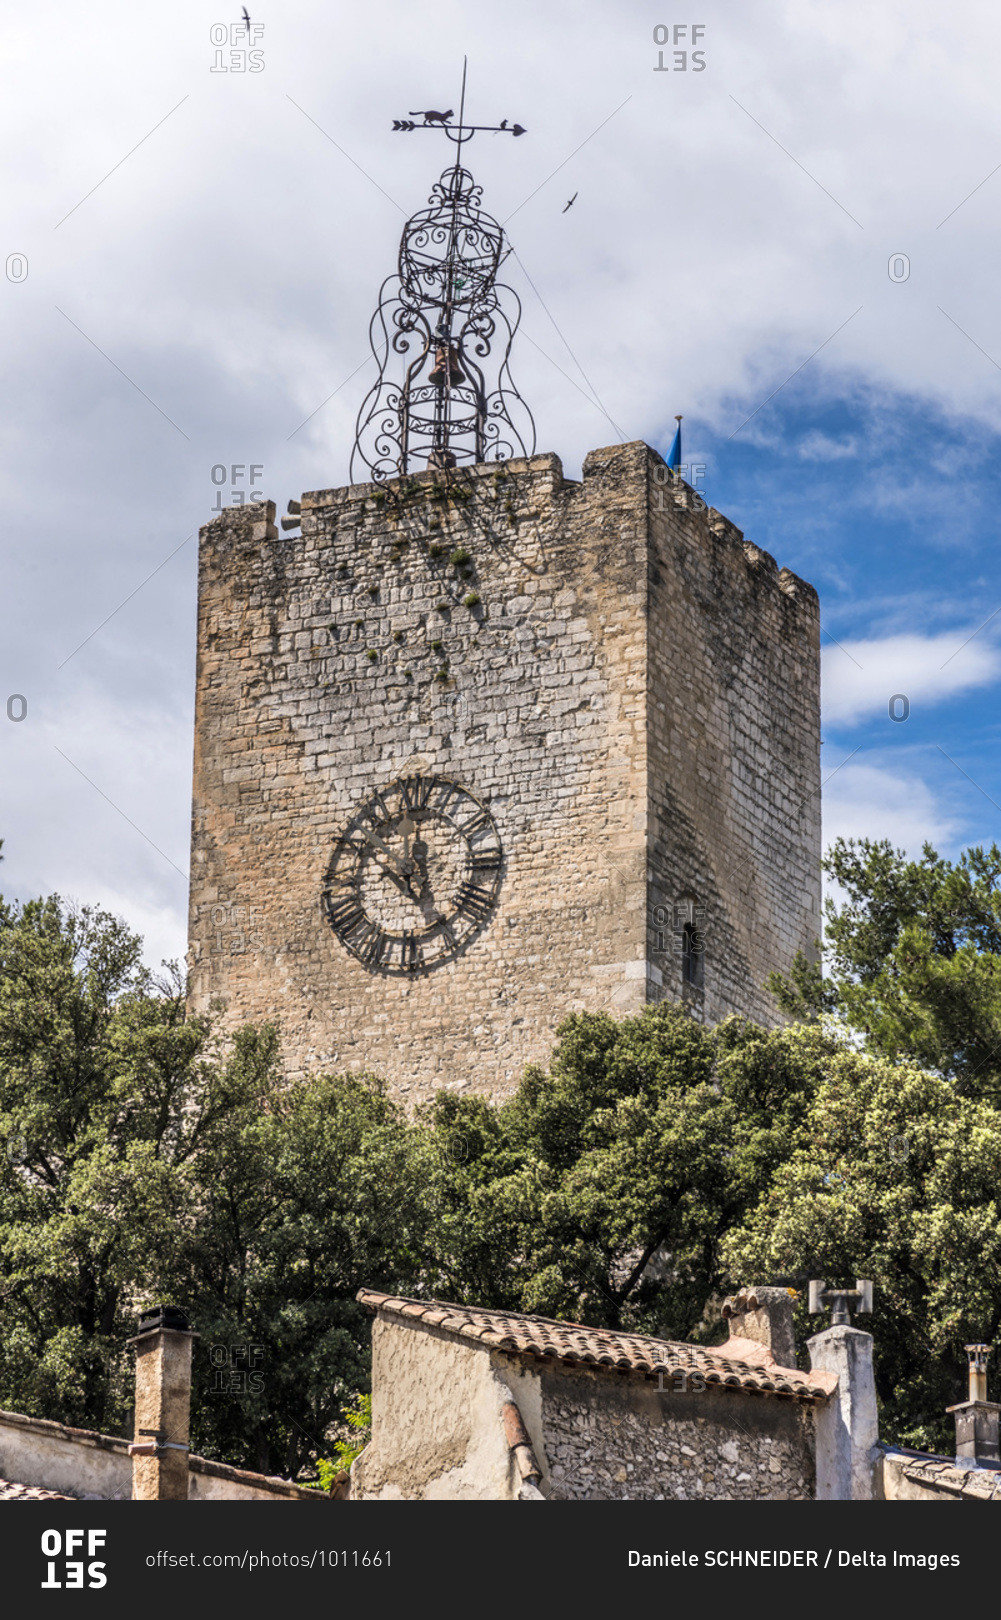 France, Provence-Alpes-Cote d\'Azur, Vaucluse, Pernes-les-Fontaines, bell tower (12th century), wrought iron steeple (18th century) and a weather vane with a cat chasing a mouse.